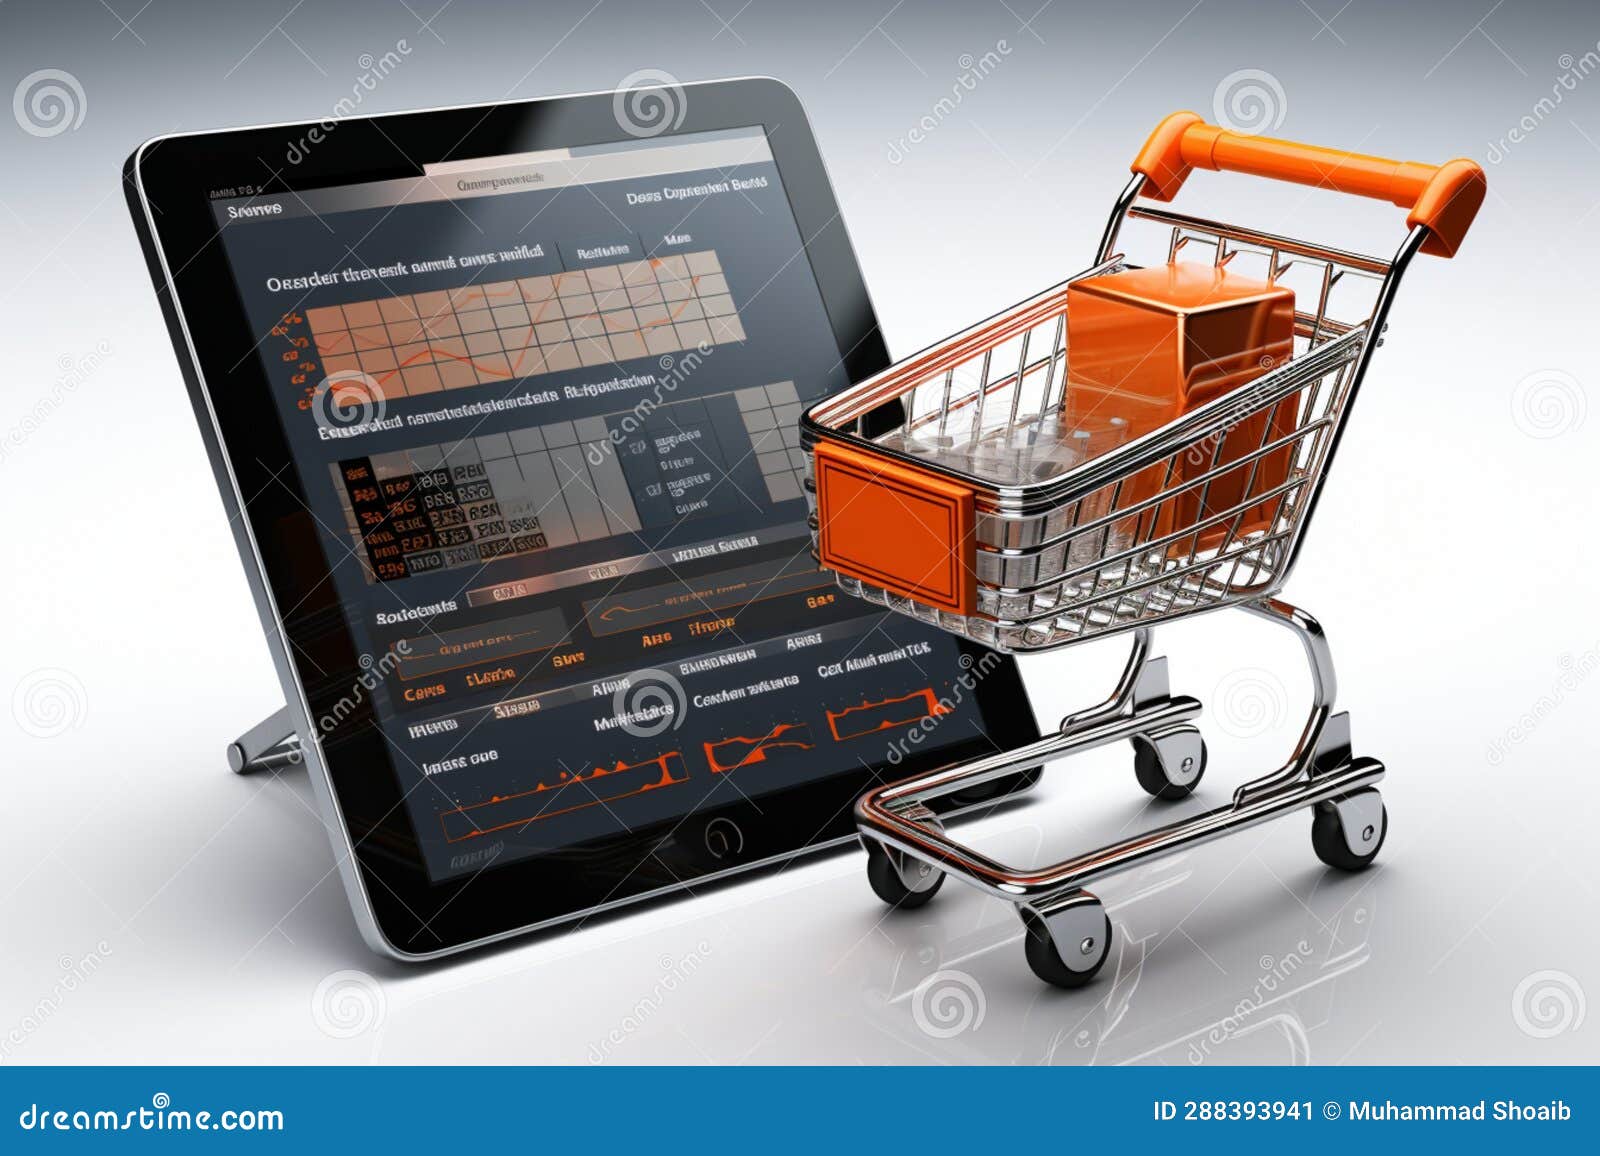 3d clipboard integrates shopping cart for organized online purchases.